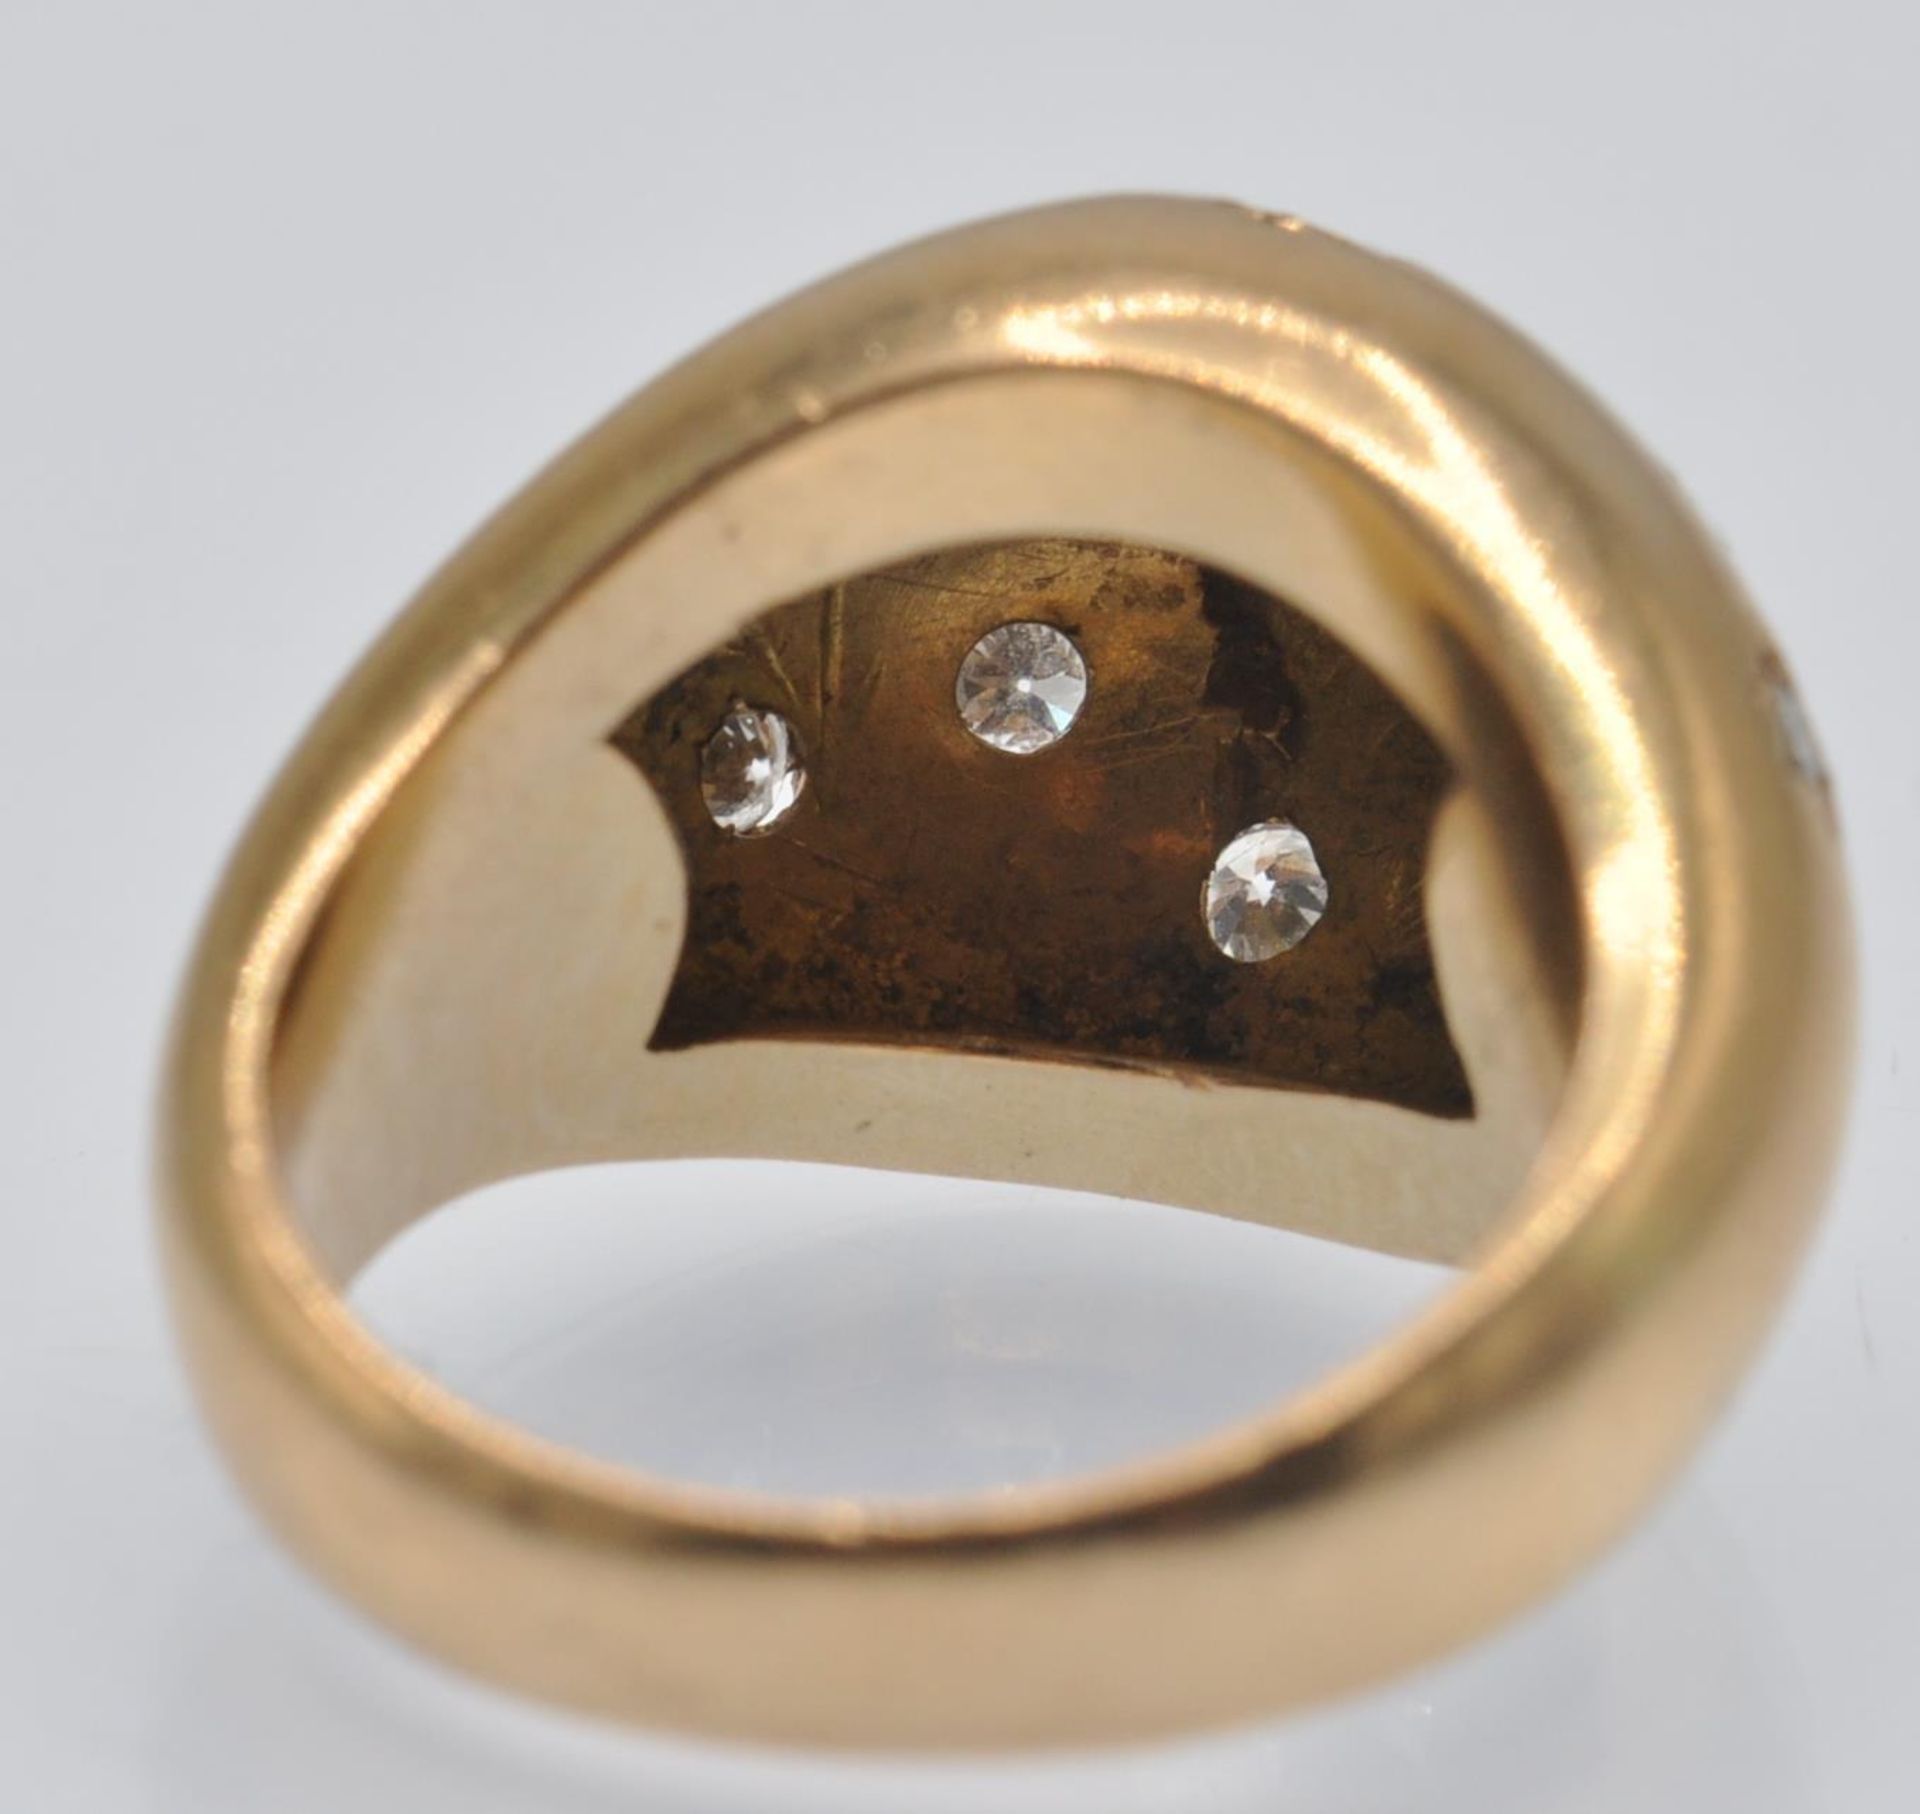 An 18ct Gold & Diamond Bombe Ring - Image 4 of 5